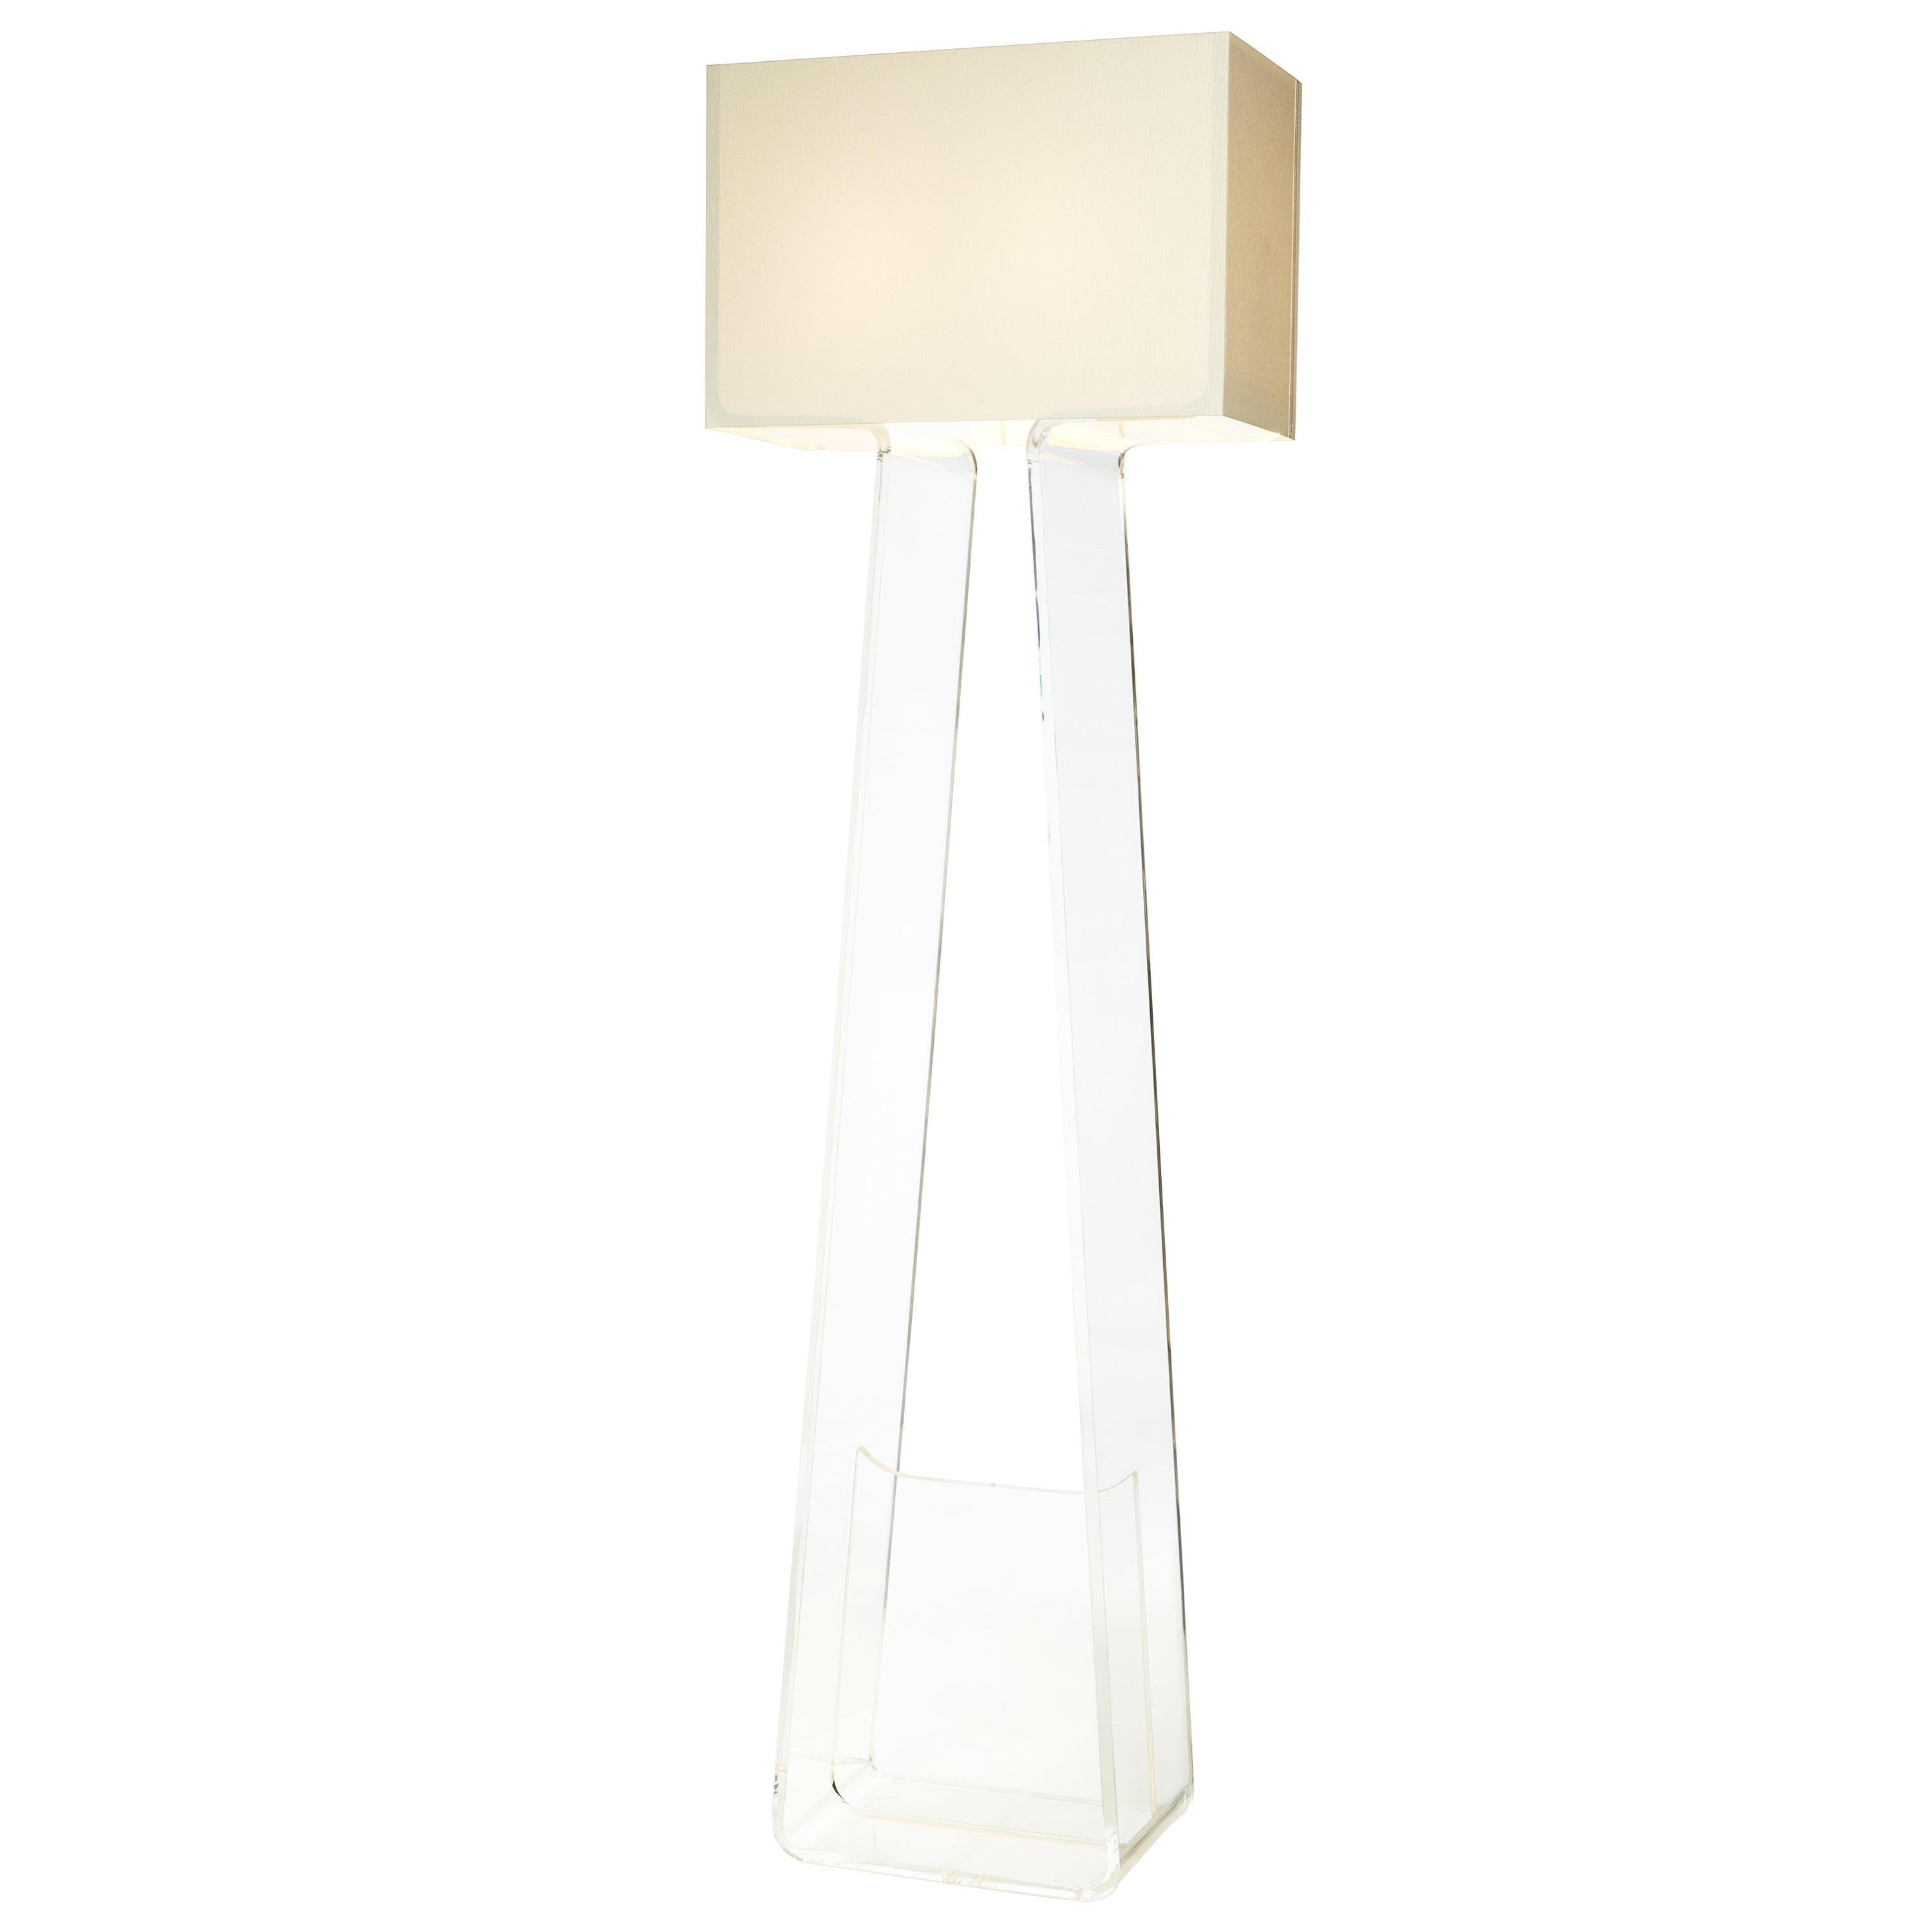 Tubetop 60 Floor Lamp in White and Clear by Pablo Designs